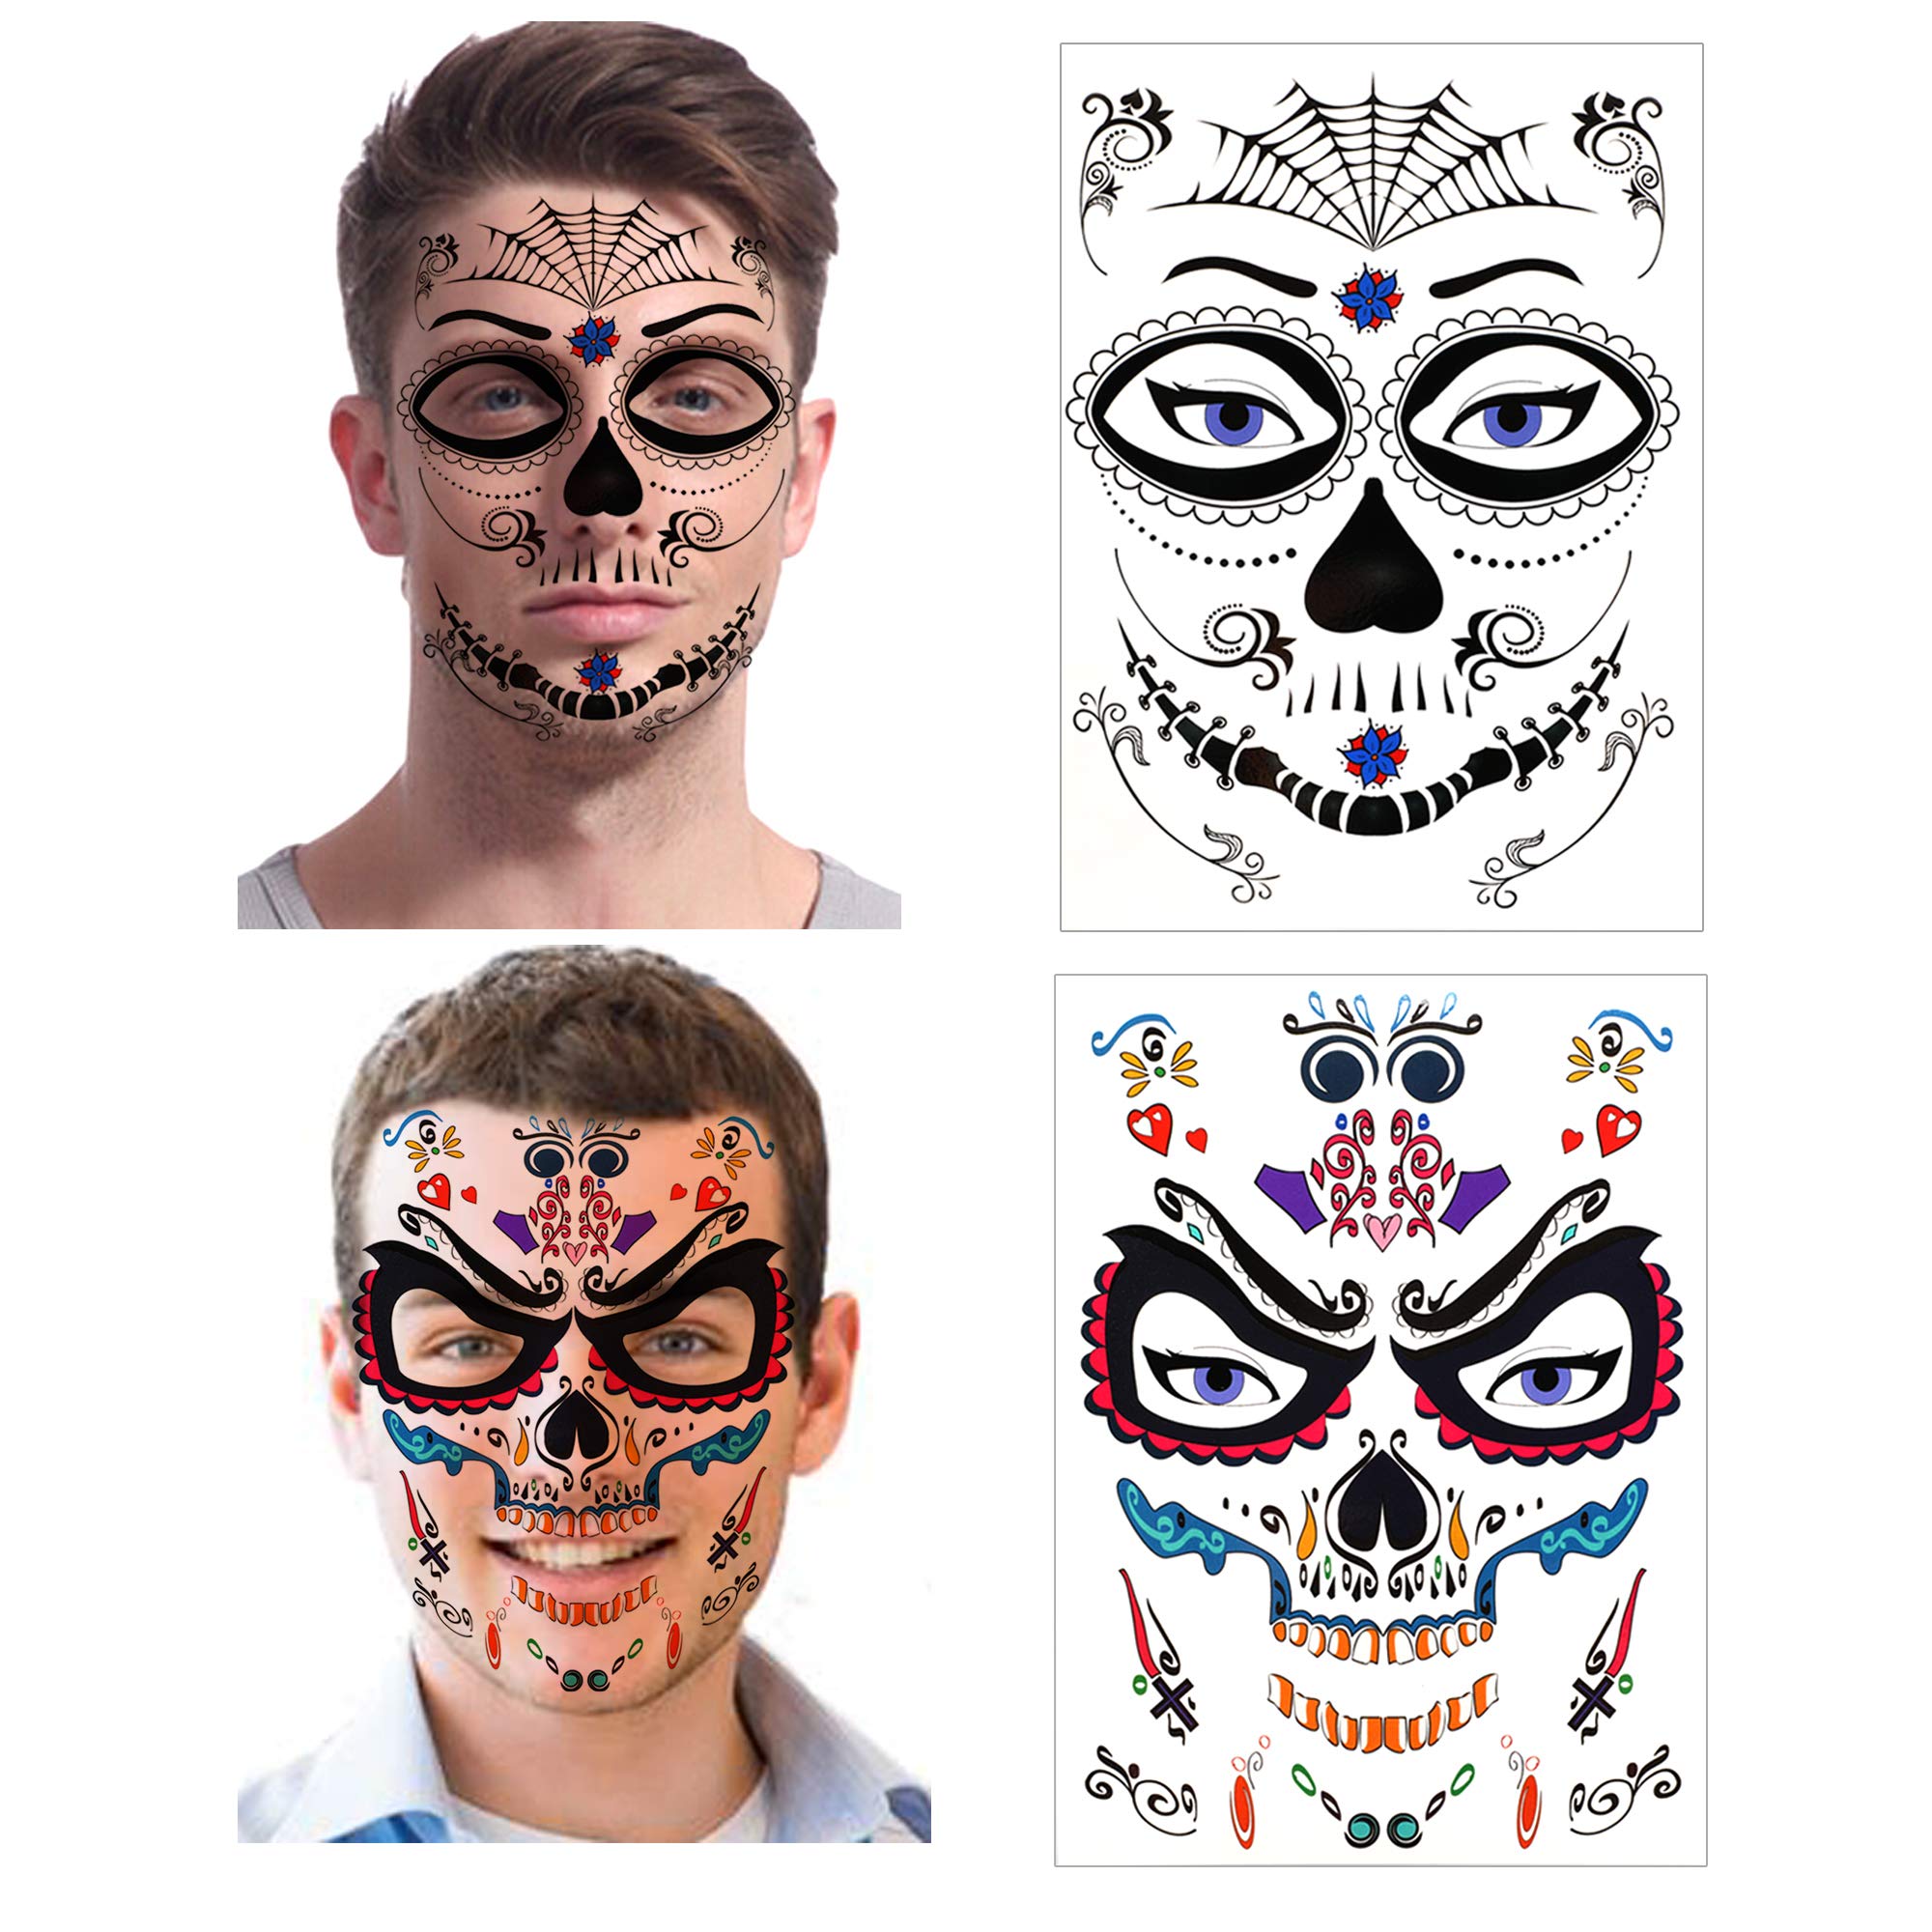 Halloween Temporary Face Tattoos (8Pack), Konsait Day of the Dead Sugar Skull Floral Black Skeleton Web Red Roses Full Face Mask Tattoo for Women Men Adult Kids Boys Halloween Party Favor Supplies